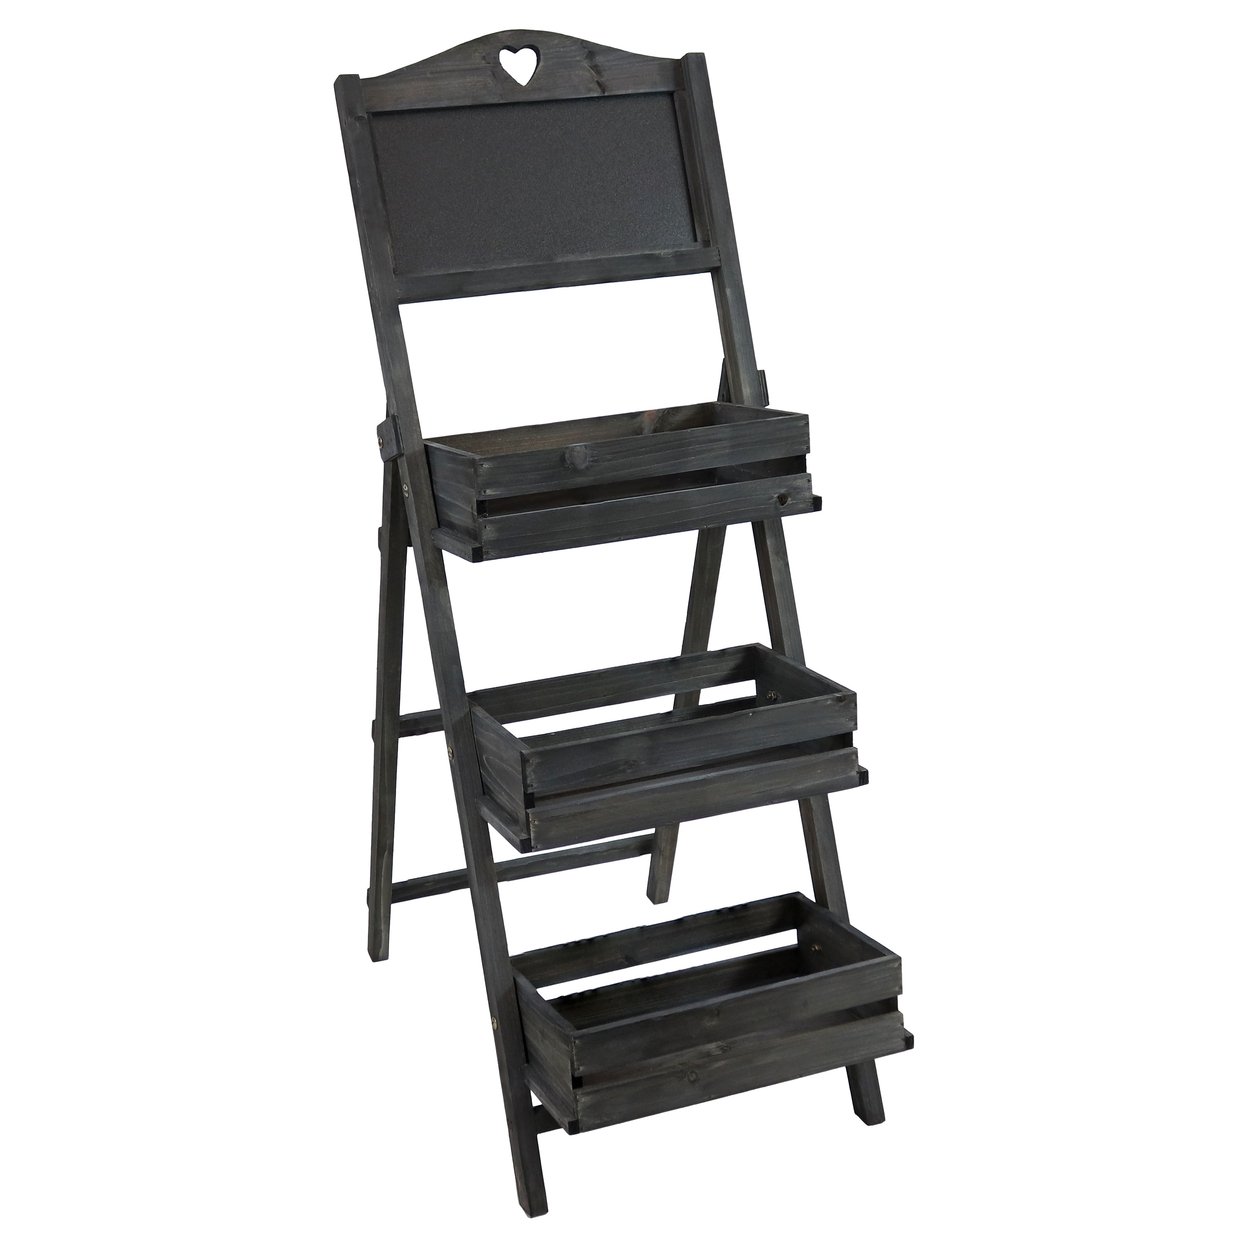 Sunnydaze   Country Heart Ladder Plant Stand with Chalkboard - Black